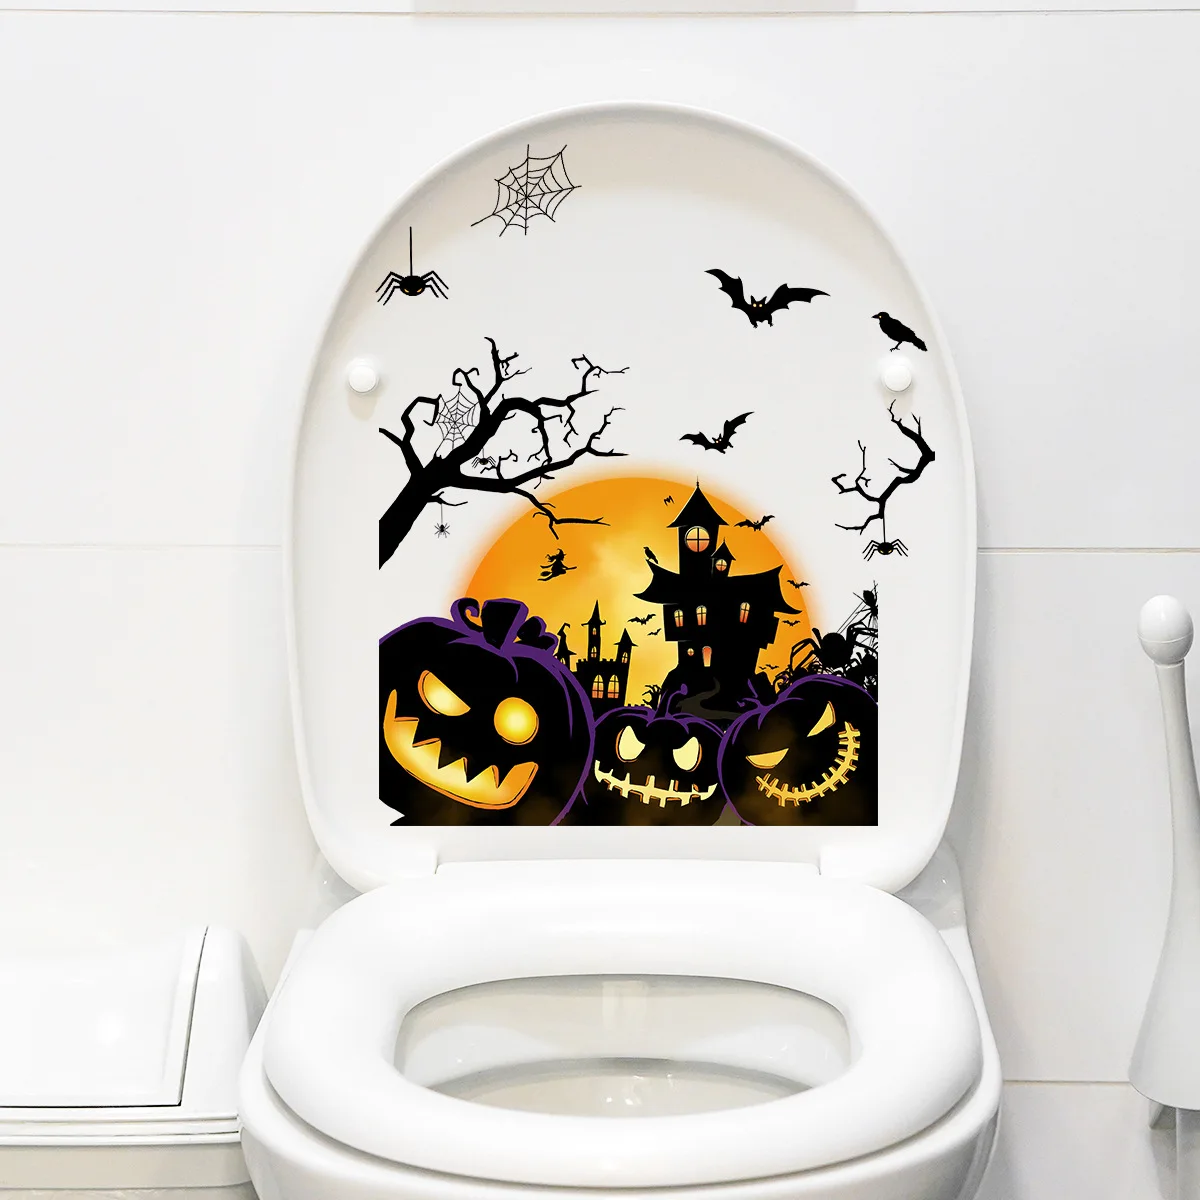 

Scary Halloween Decorations Bathroom Decals Spider Bat Pumpkin Black Tree Branches Toilet Lid Cover Stickers Holiday Decor